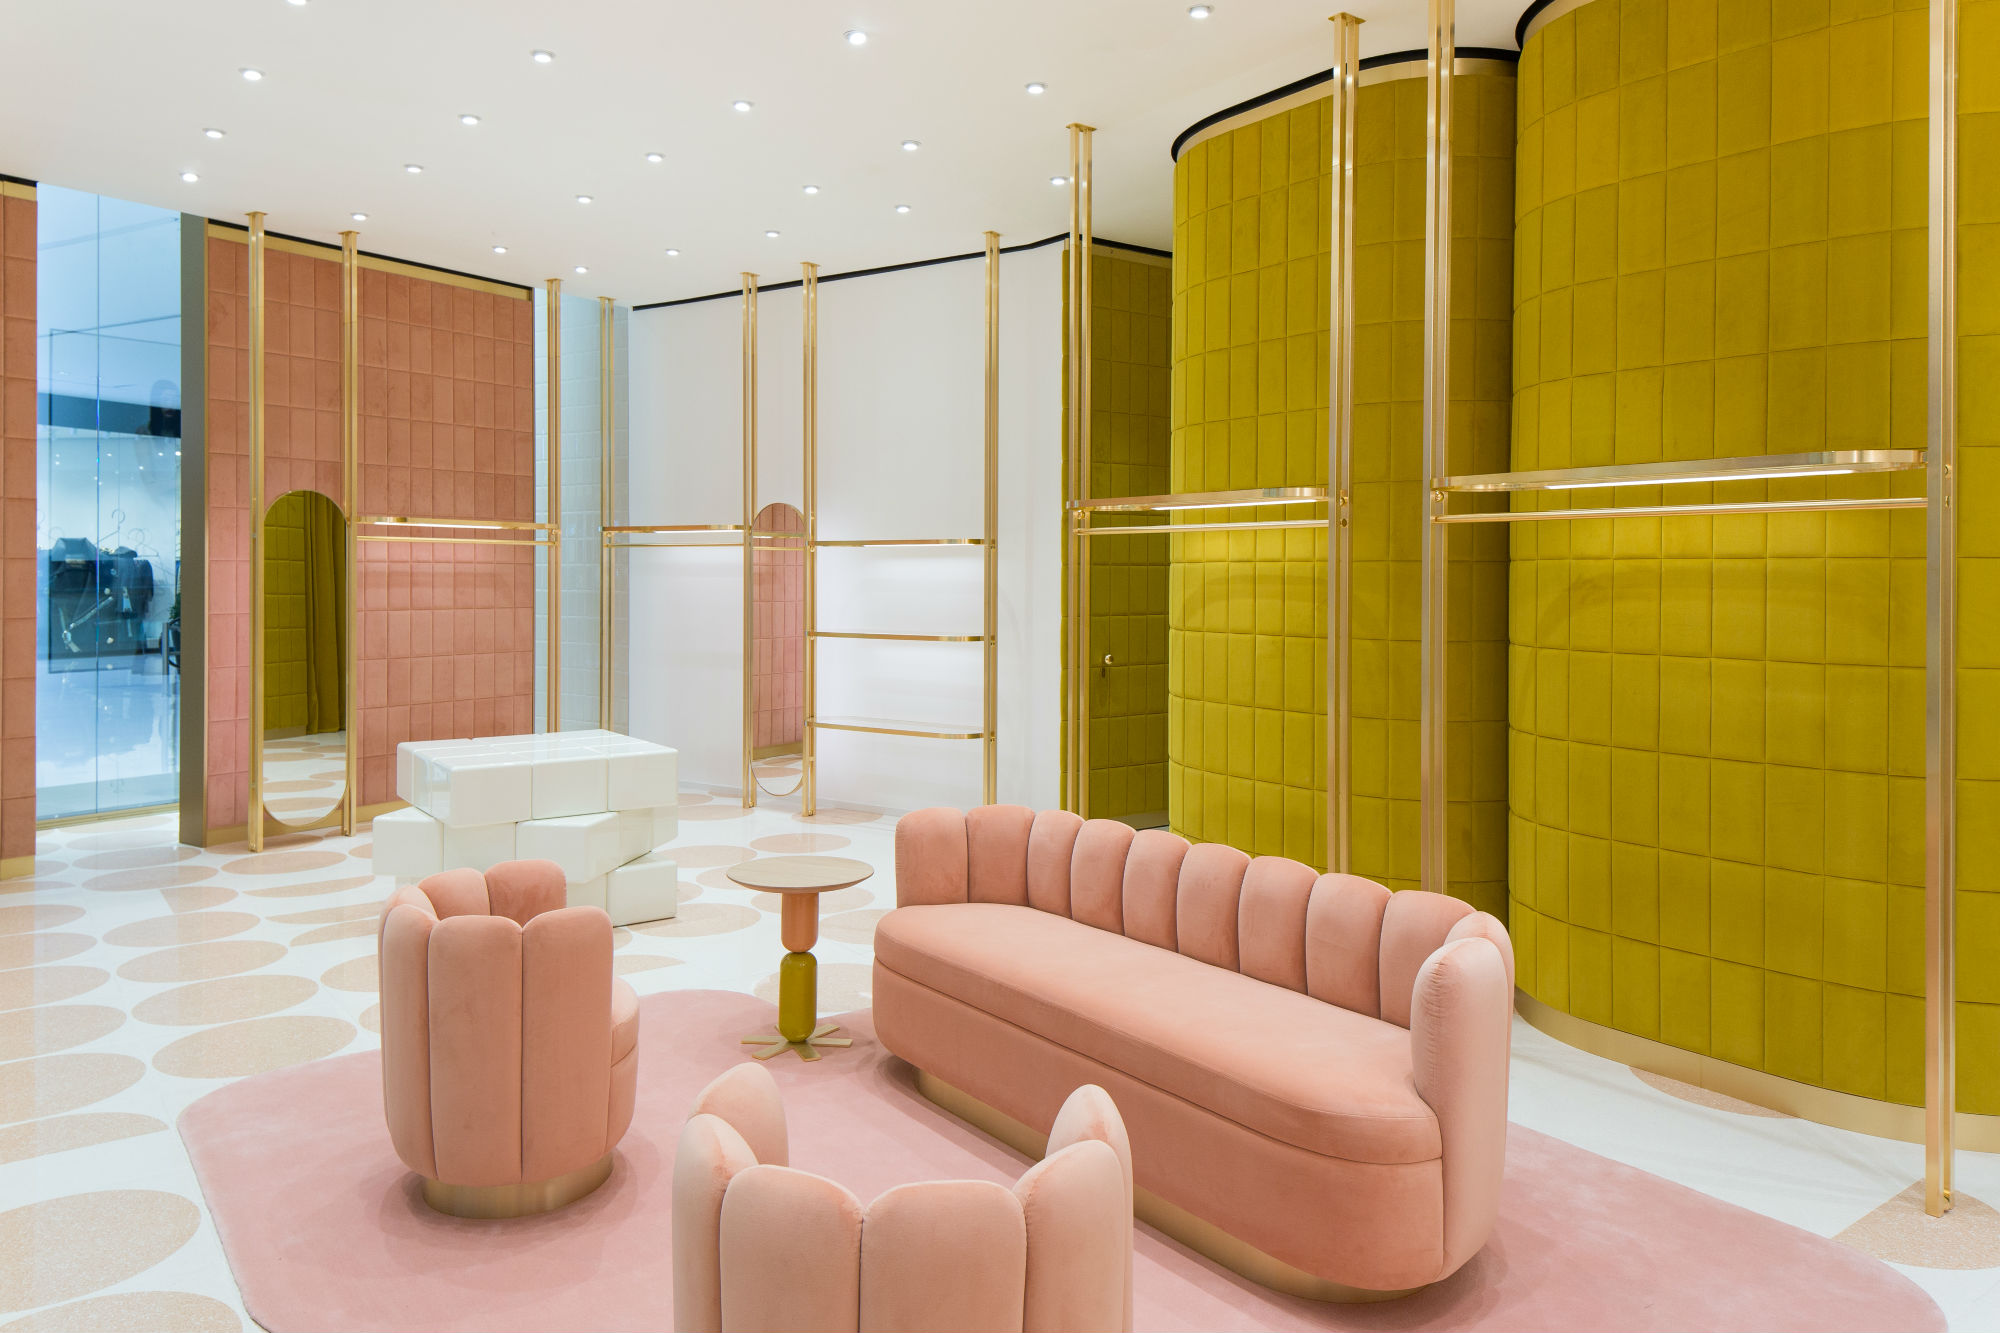 Take a Inside the REDValentino Store that Is Now Open In The Dubai Mall A&E Magazine